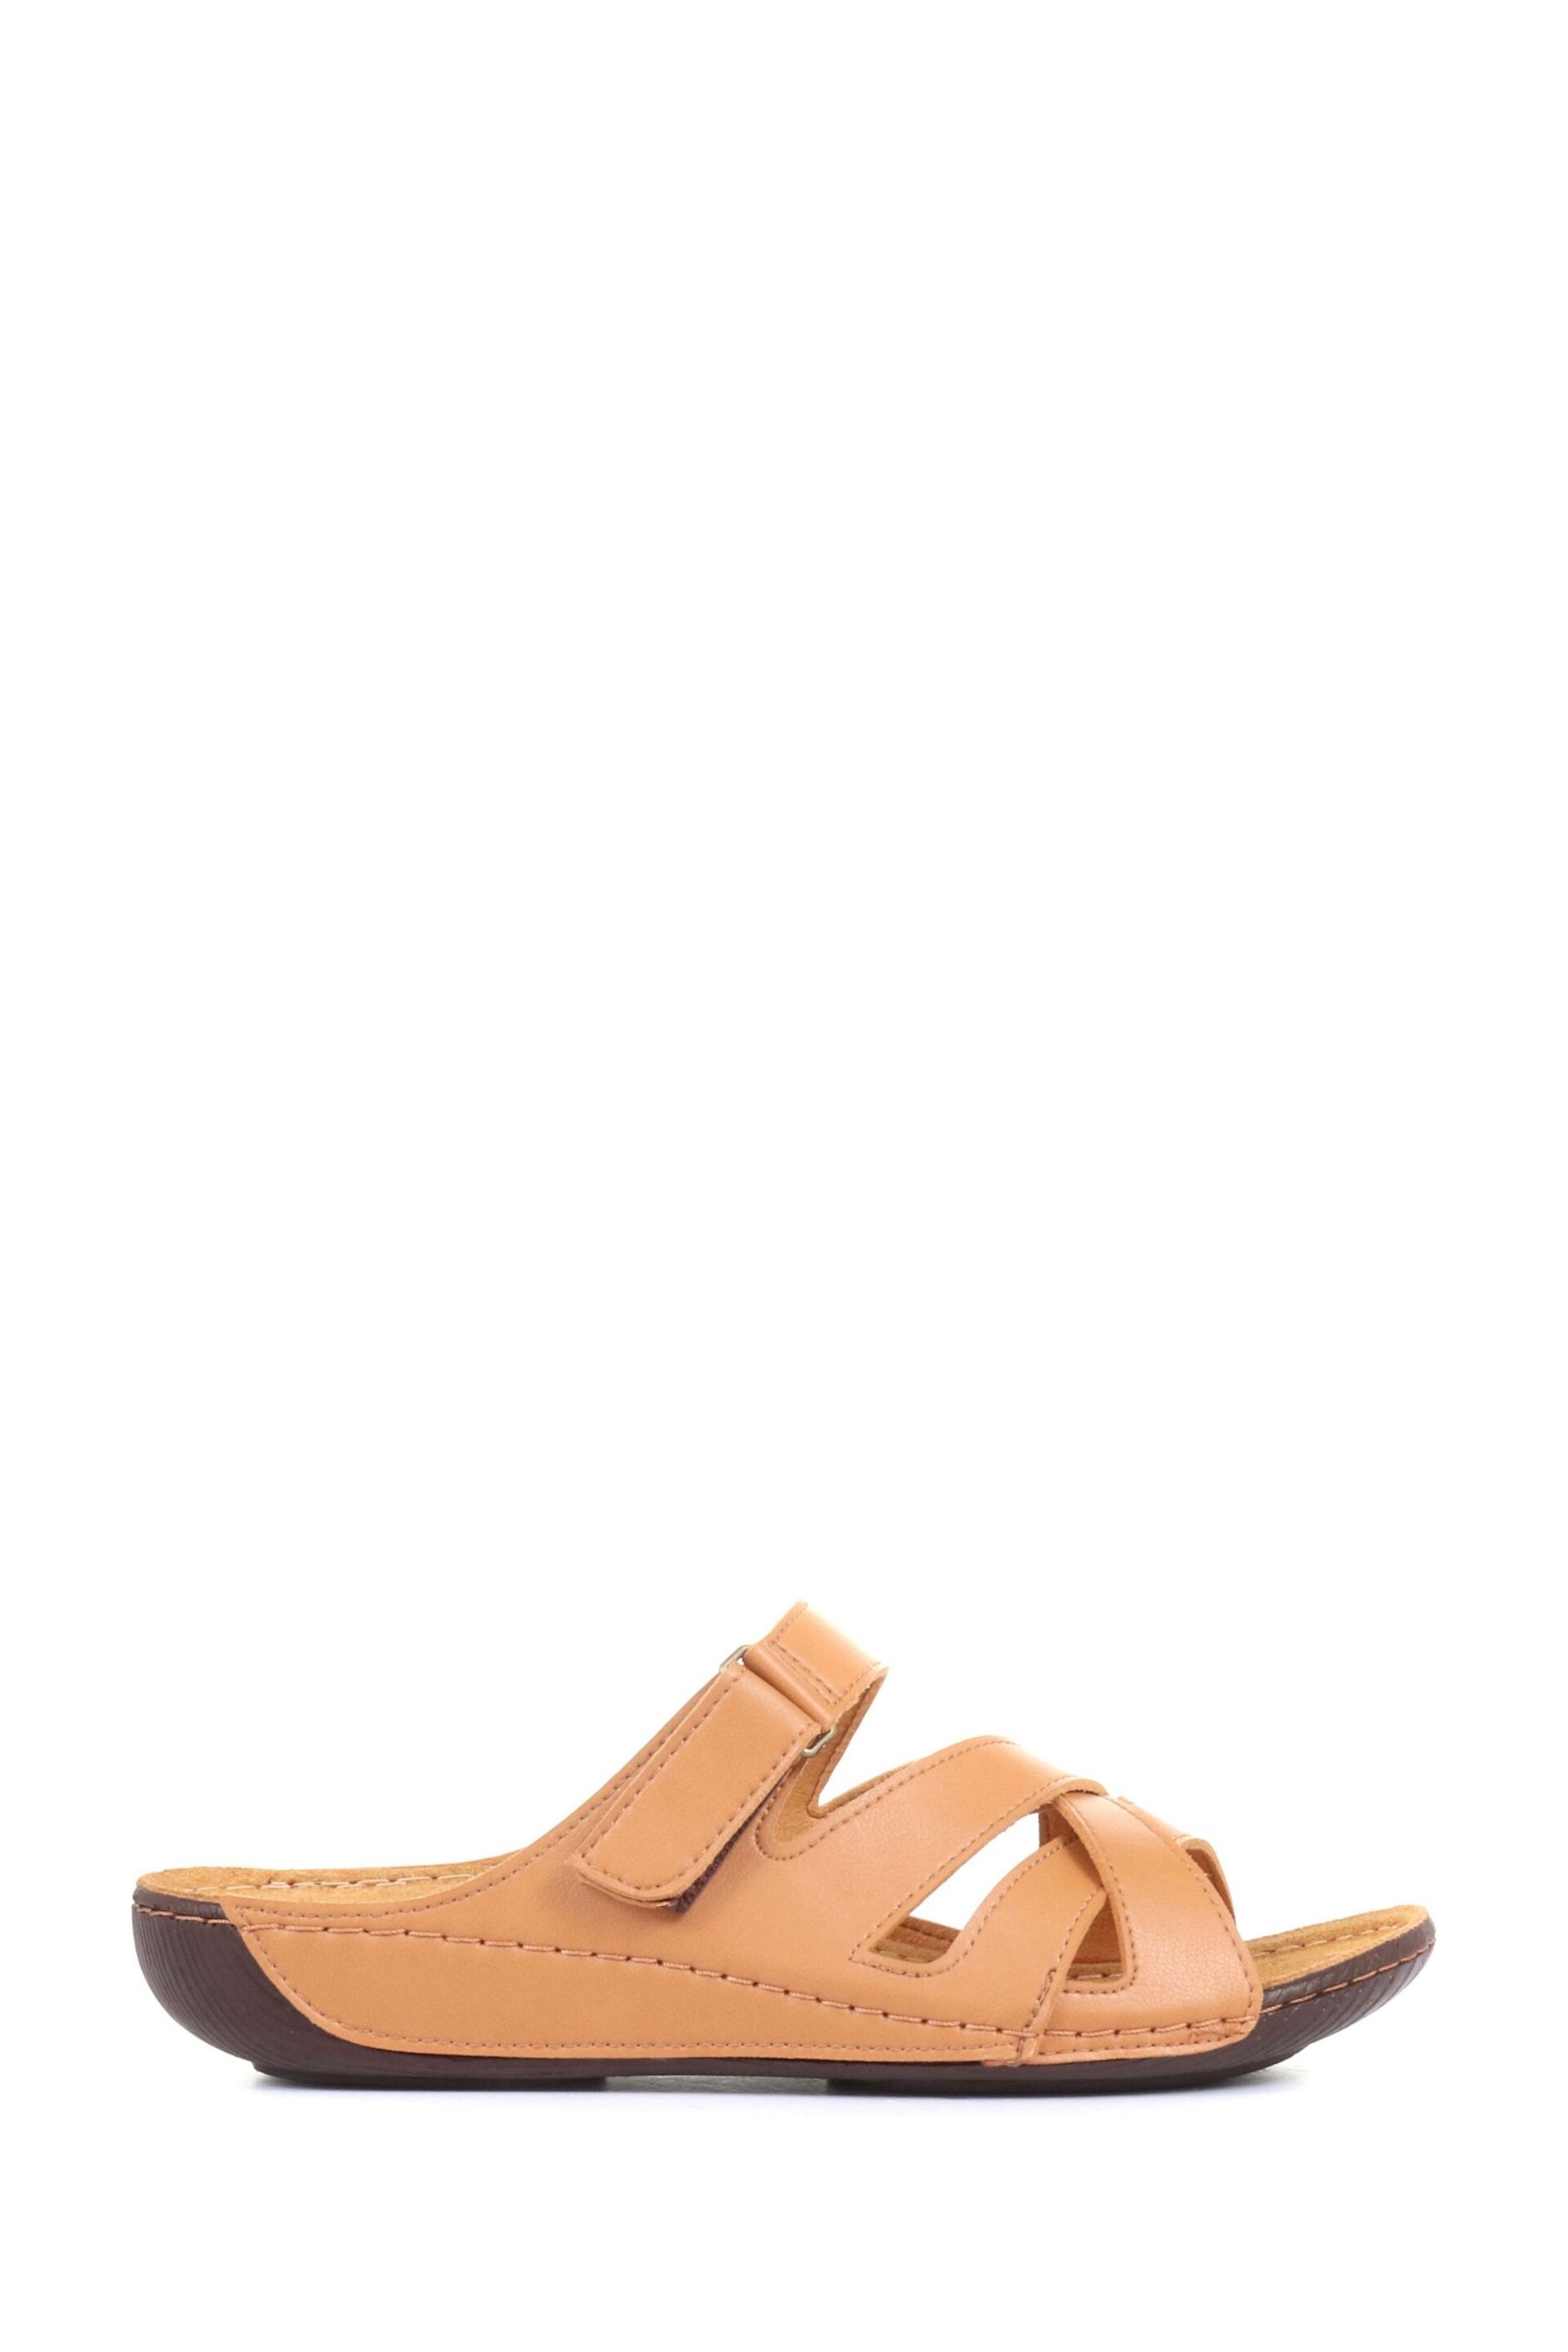 Pavers Tan Ladies Touch Fasten Mules - Image 1 of 5